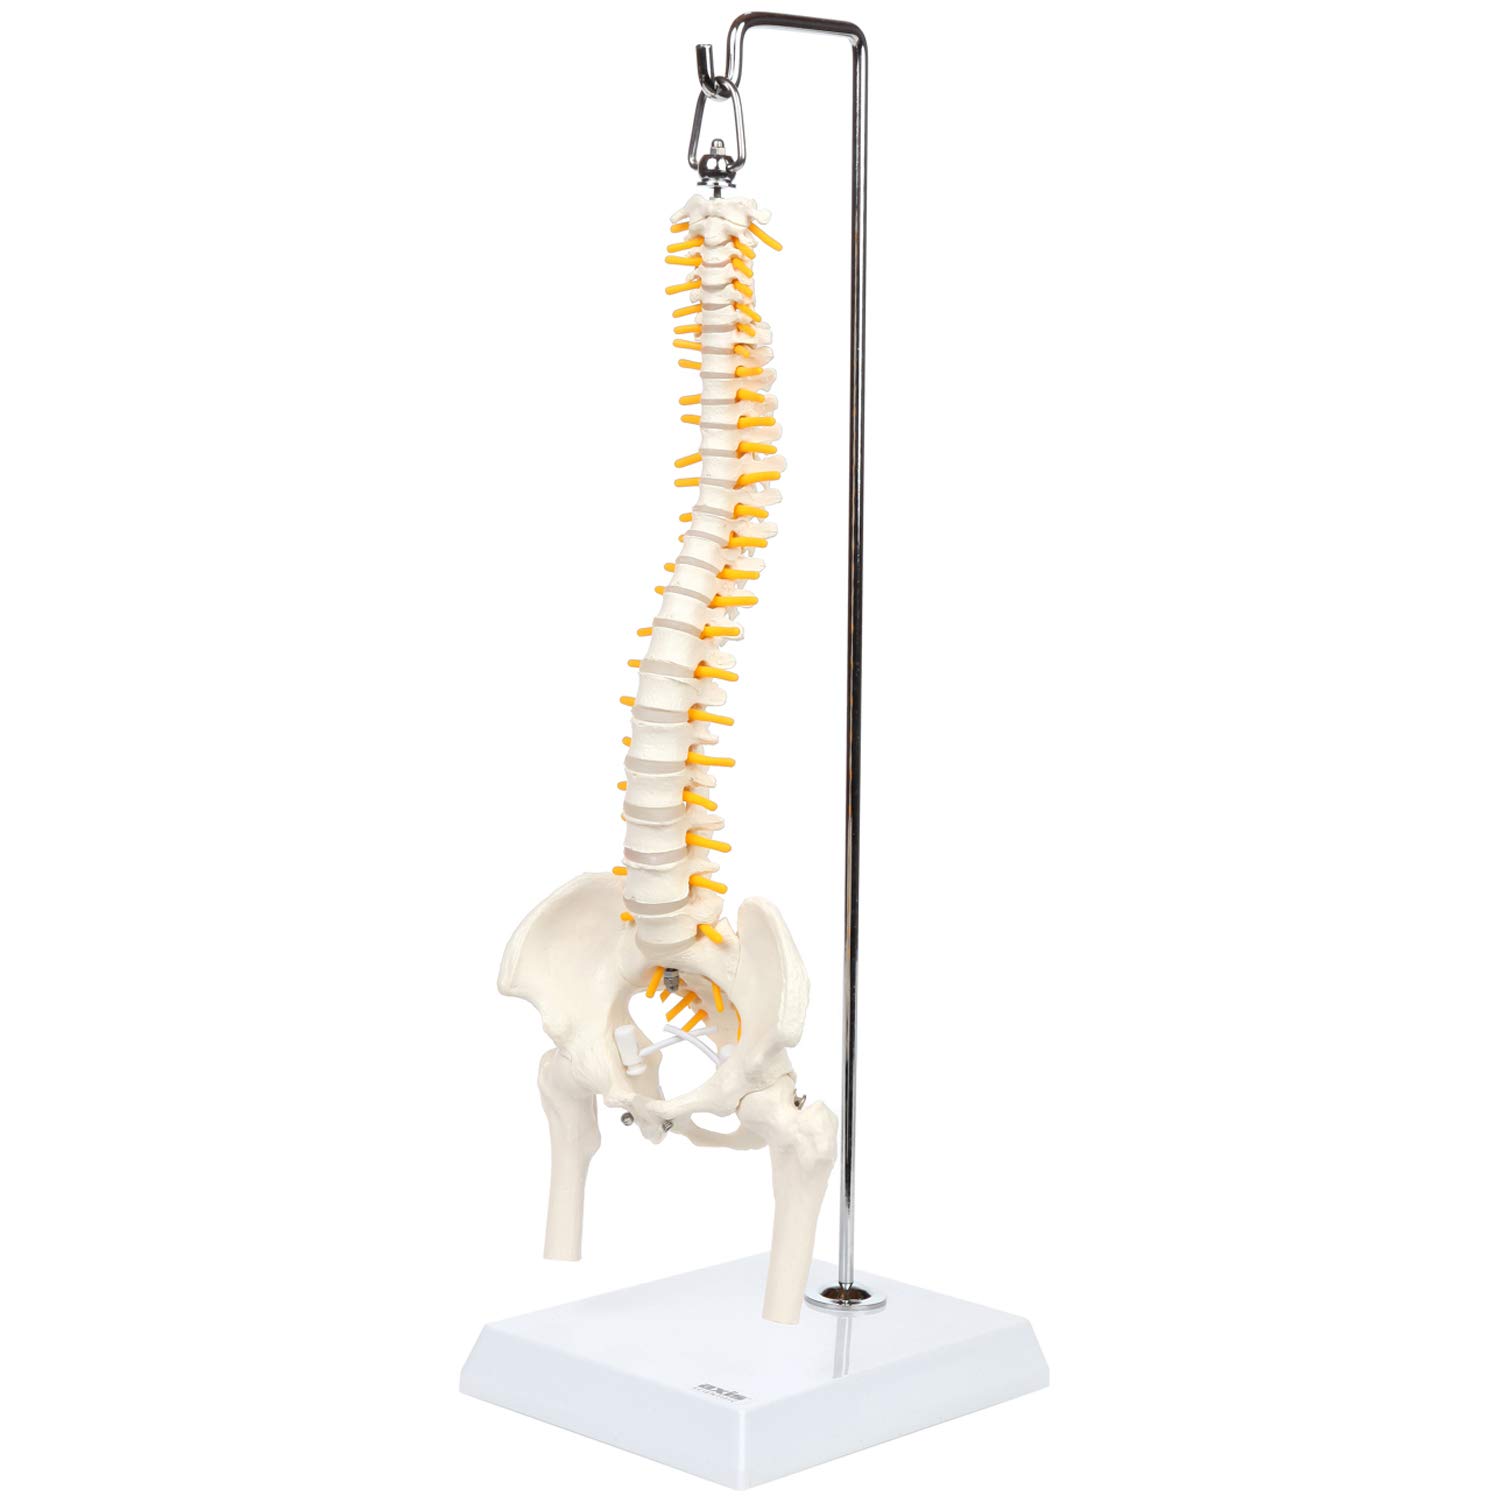 Axis Scientific 15.5" Mini Spine Model with Vertebrae,Nerves,Arteries, Lumbar Column,Male Pelvis - Human Anatomy Model for Education & Study - Includes Stand/Product Manual - Plastic Spine Model